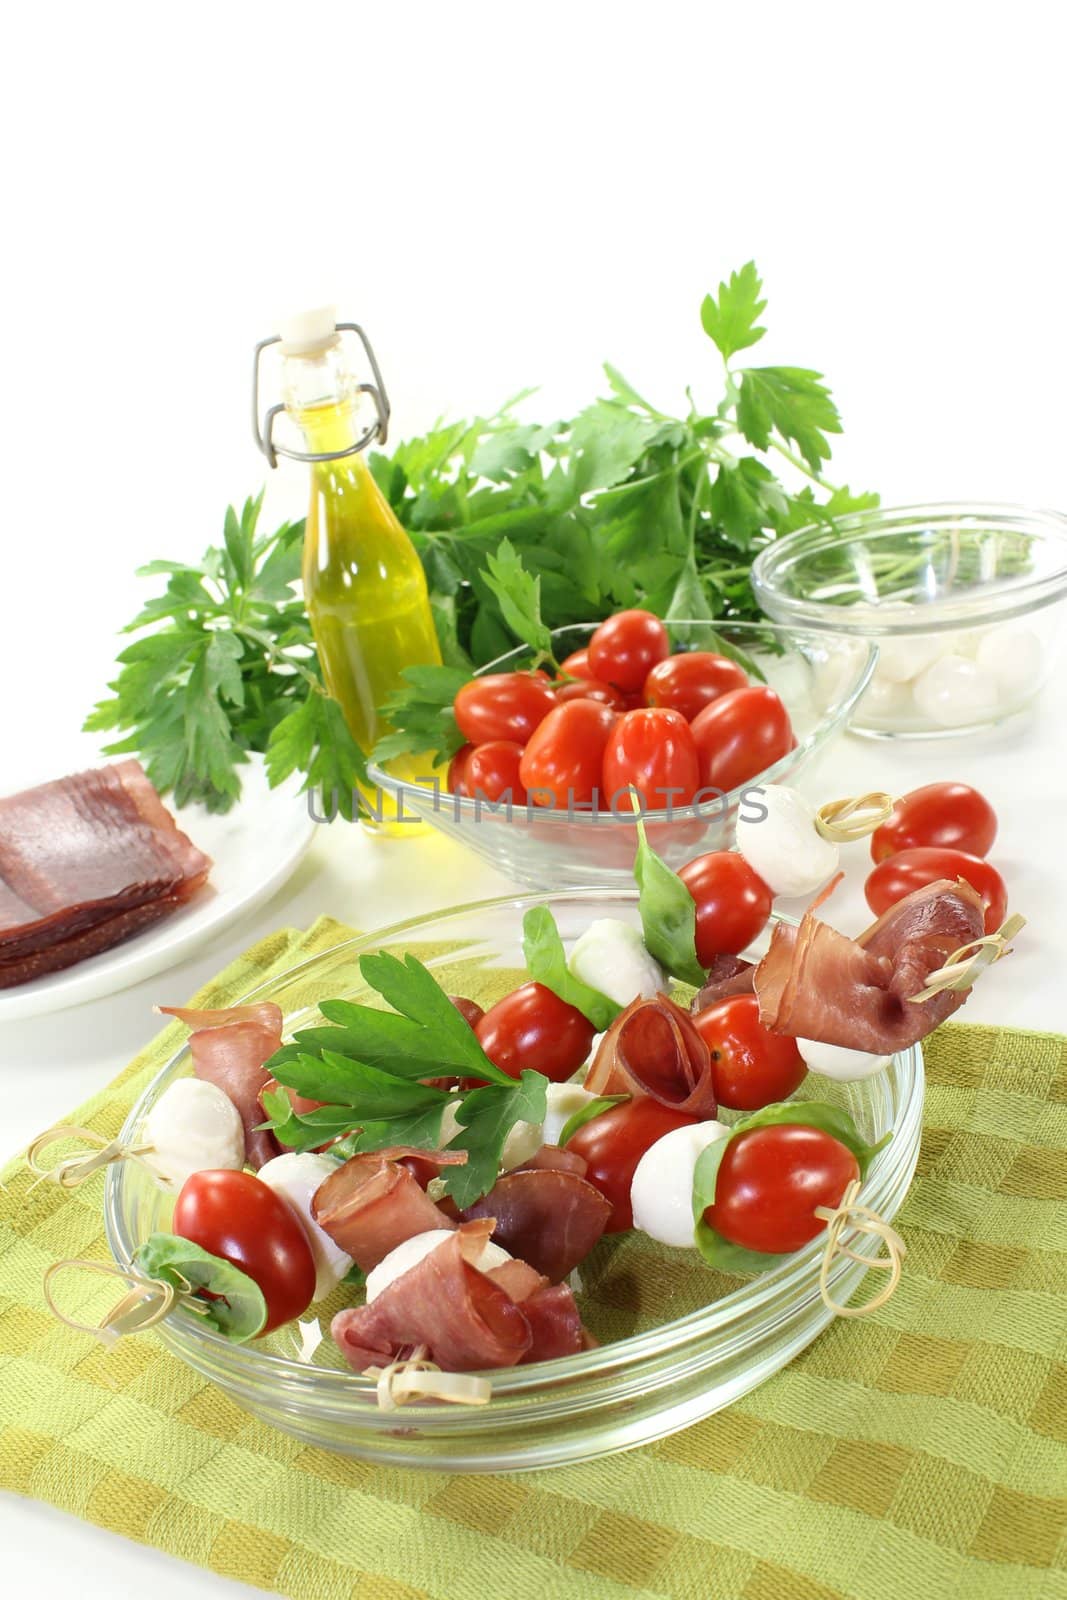 Tomato, mozzarella and ham skewers with basil on a green checkered napkin before light background